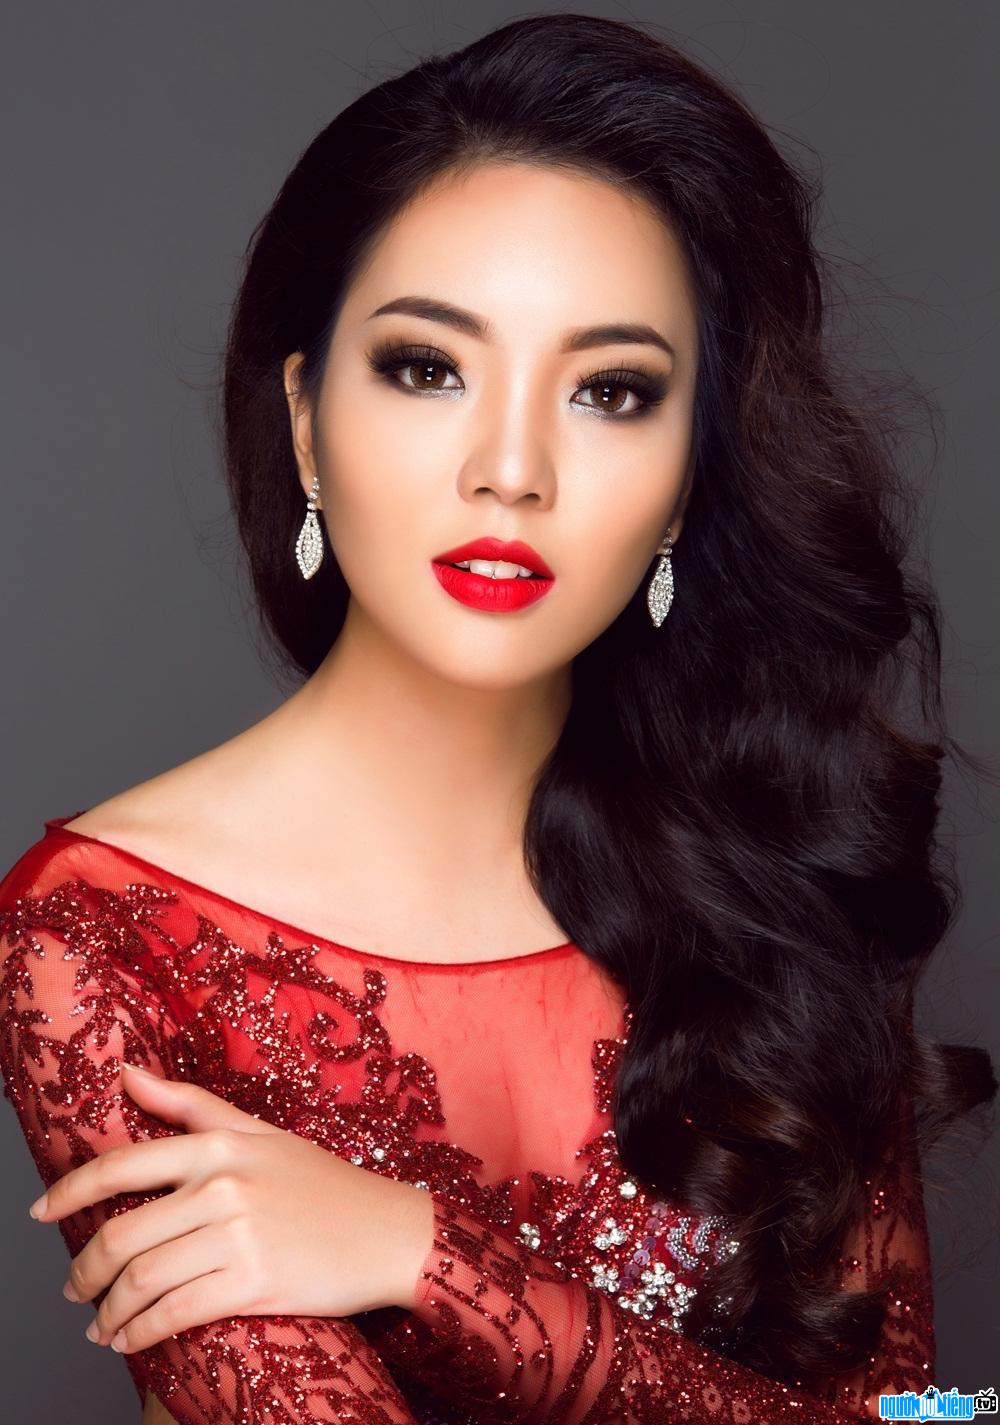 Image of Nguyen Thanh Van Anh